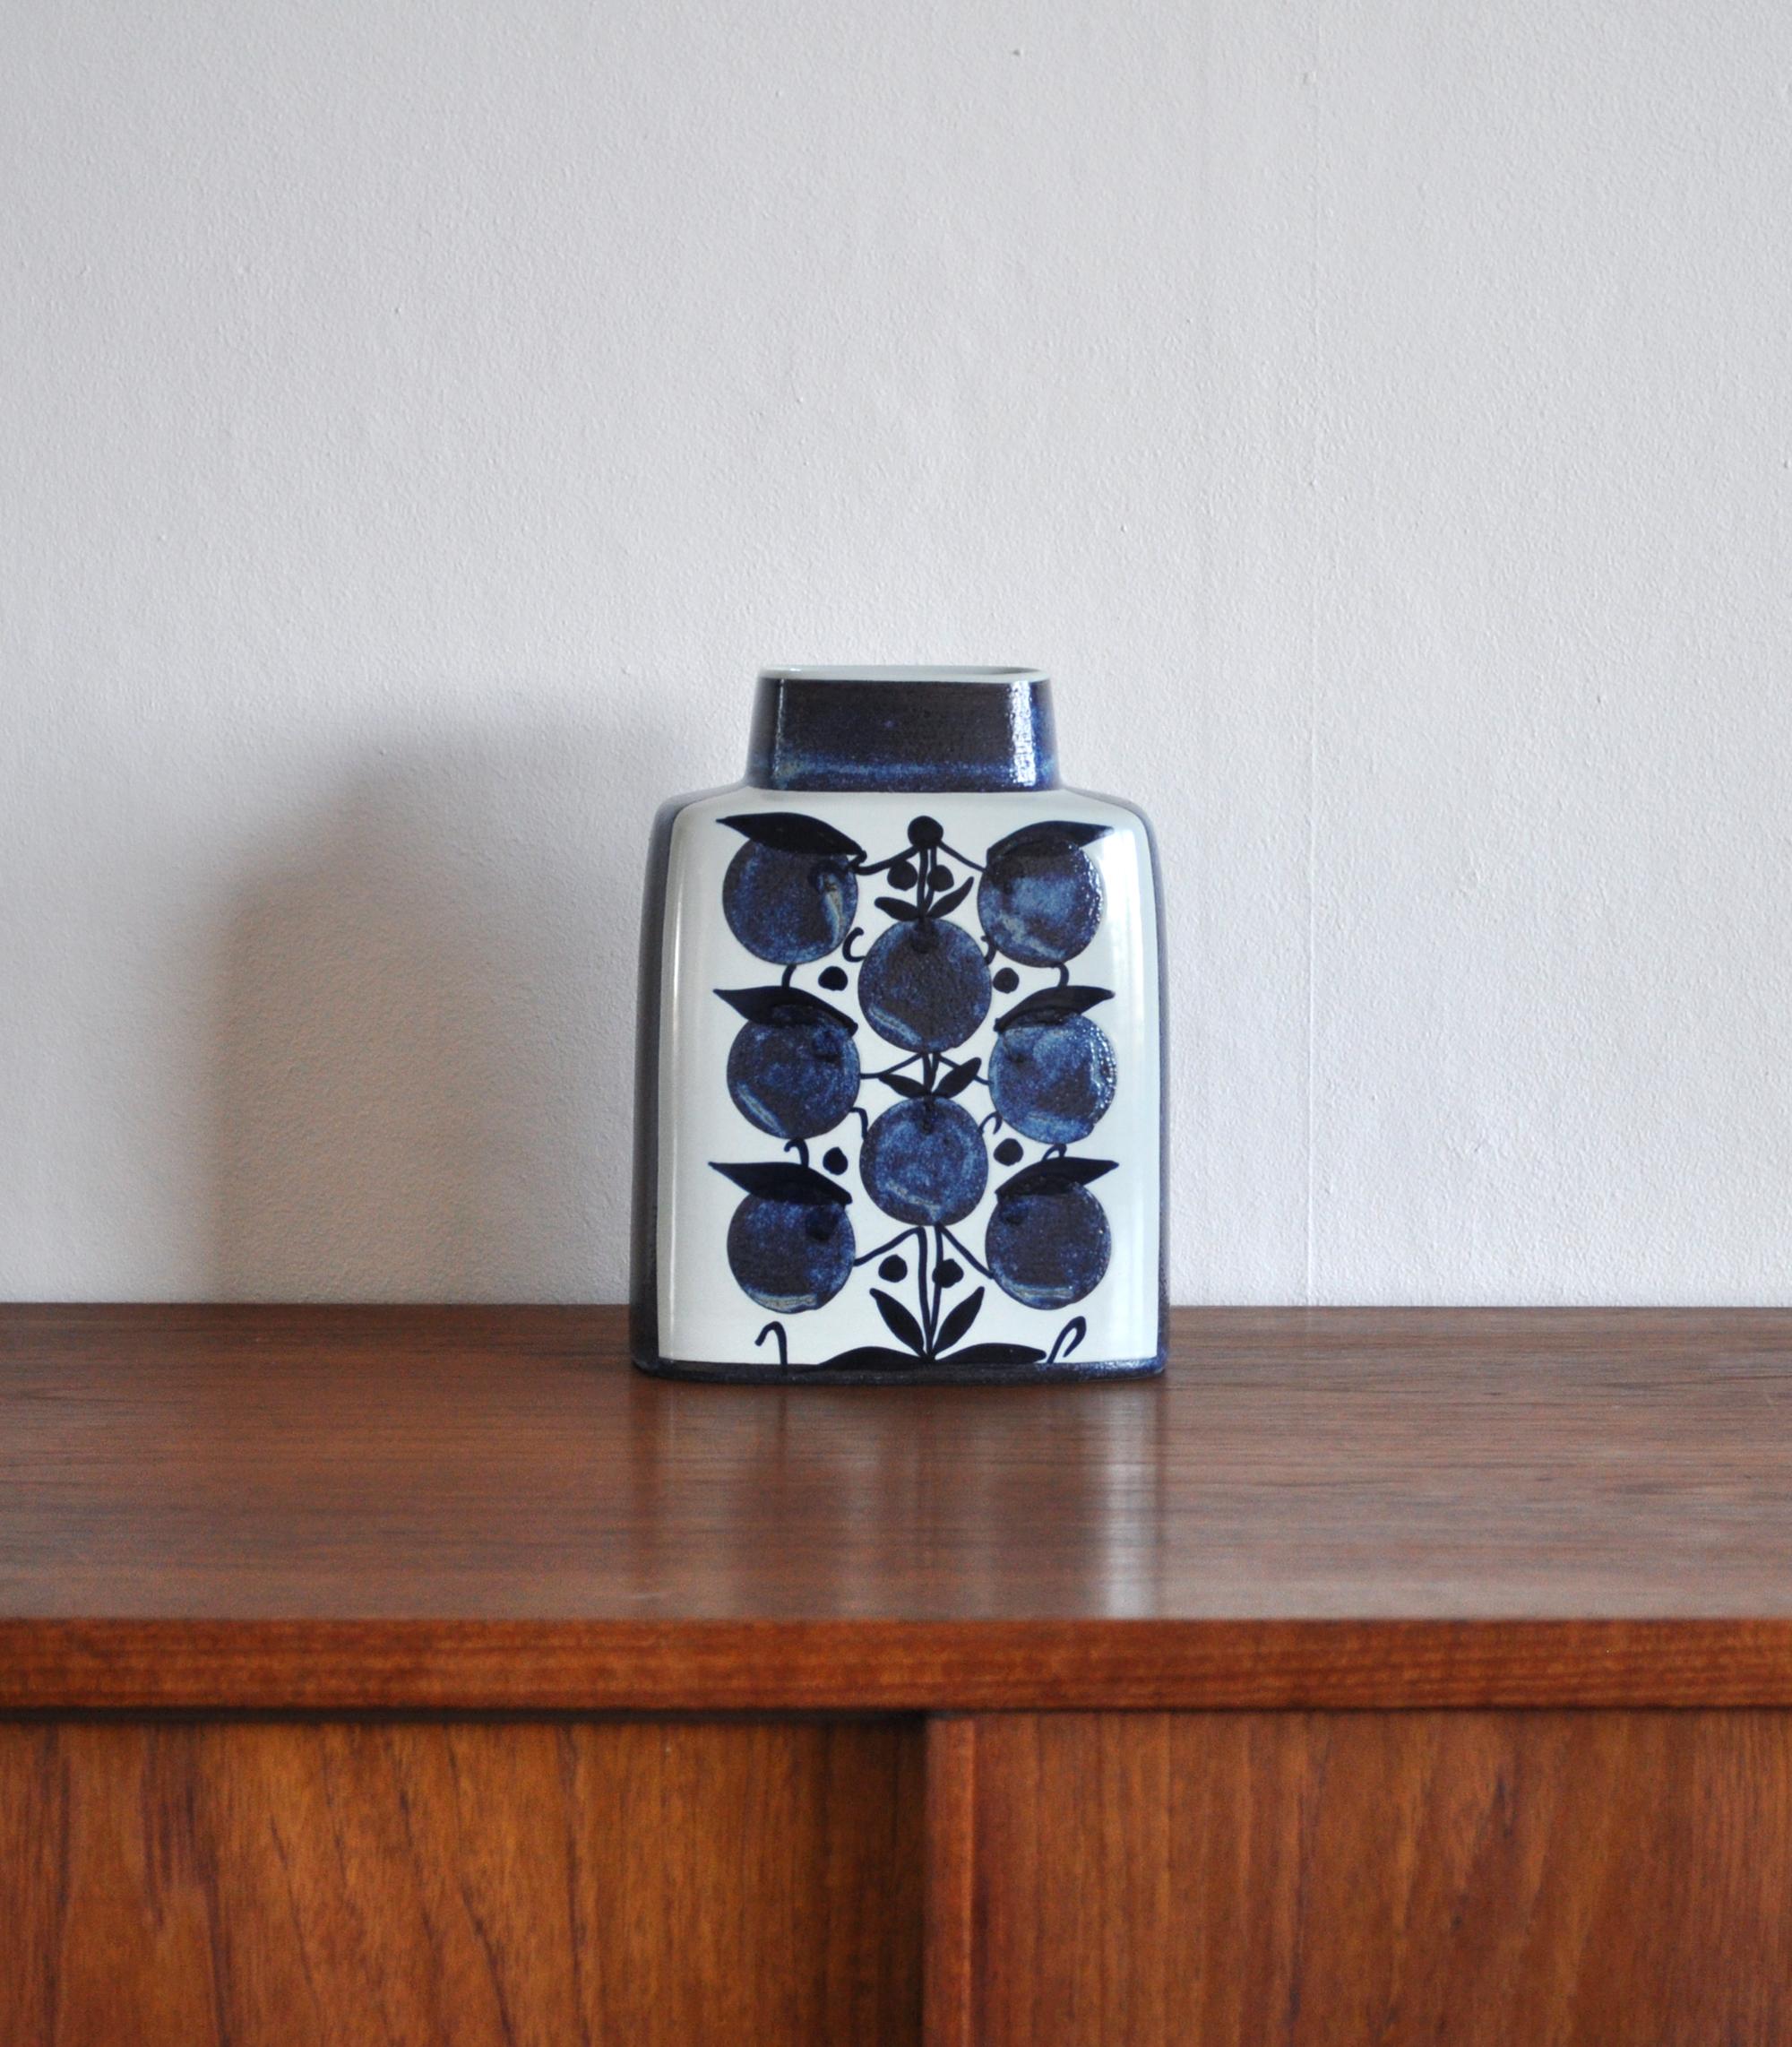 Baca fajance/ceramic vase designed by Grethe Helland Hansen and produced in 1960s at Royal Copenhagen, Denmark.
Complexed and detailed patterns which in creation from Scandinavia have become midcentury iconic fajance.
Stamped with Grethe Helland